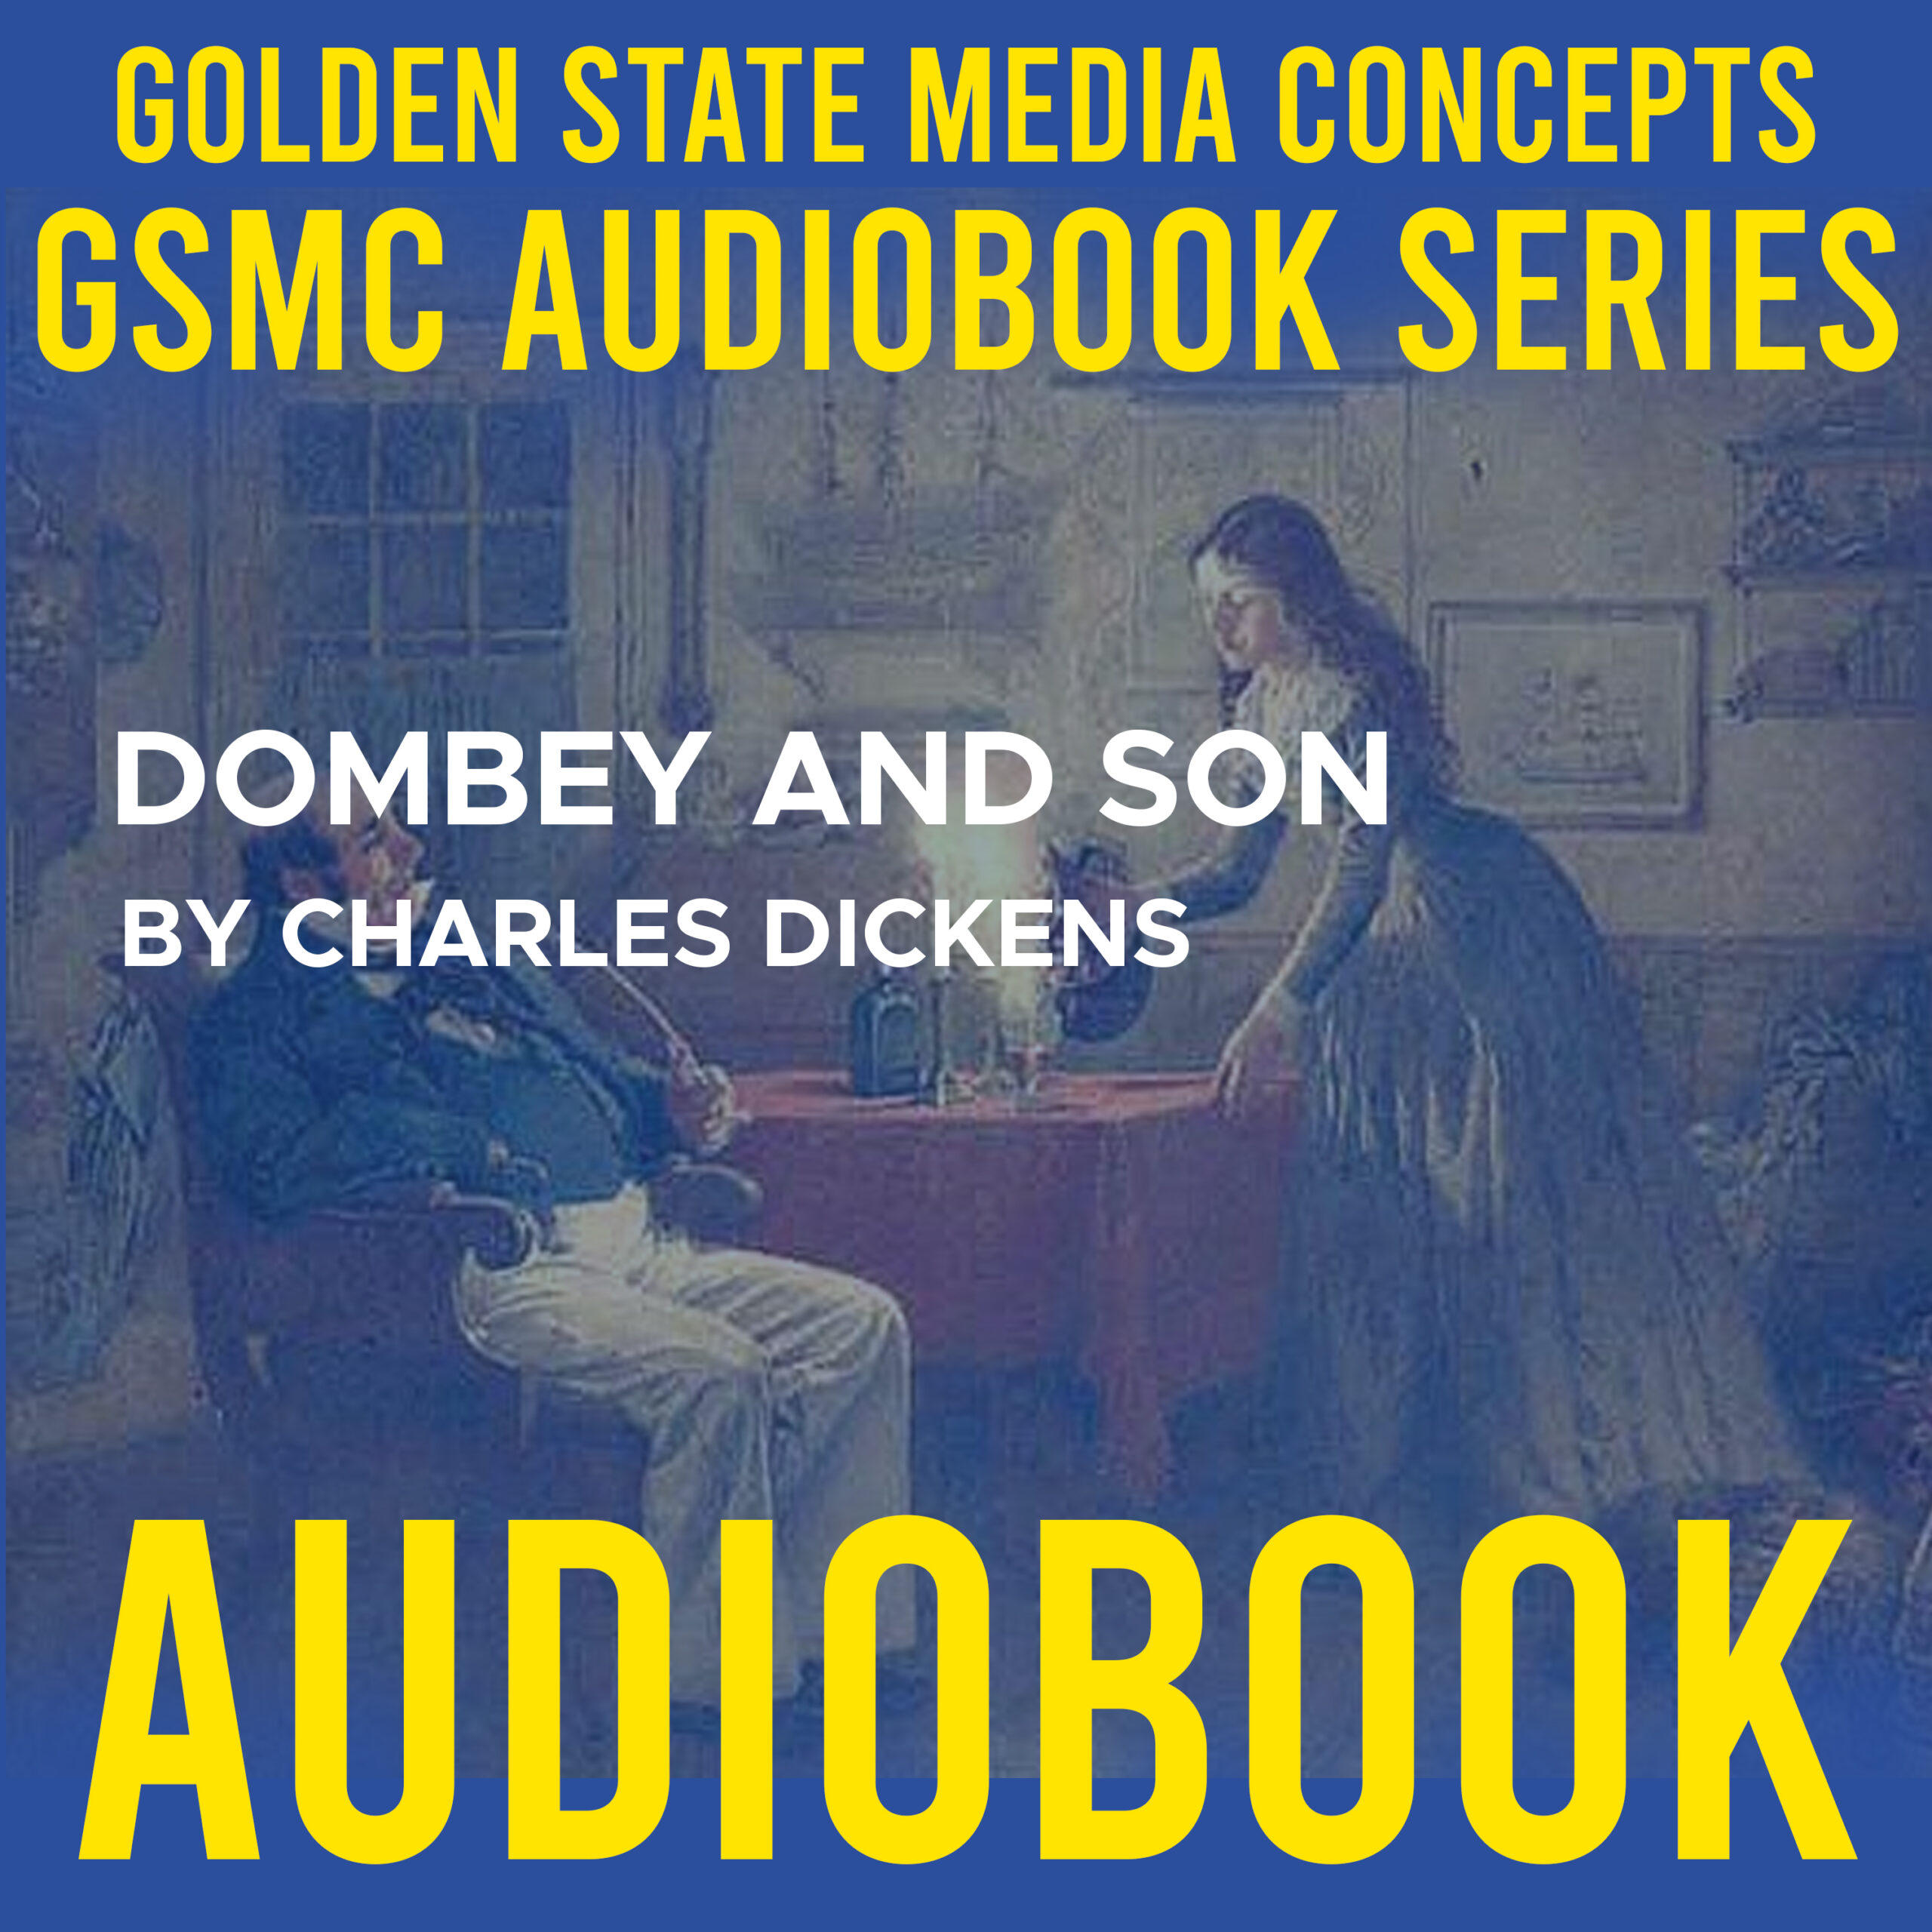 GSMC Audiobook Series: Dombey and Son